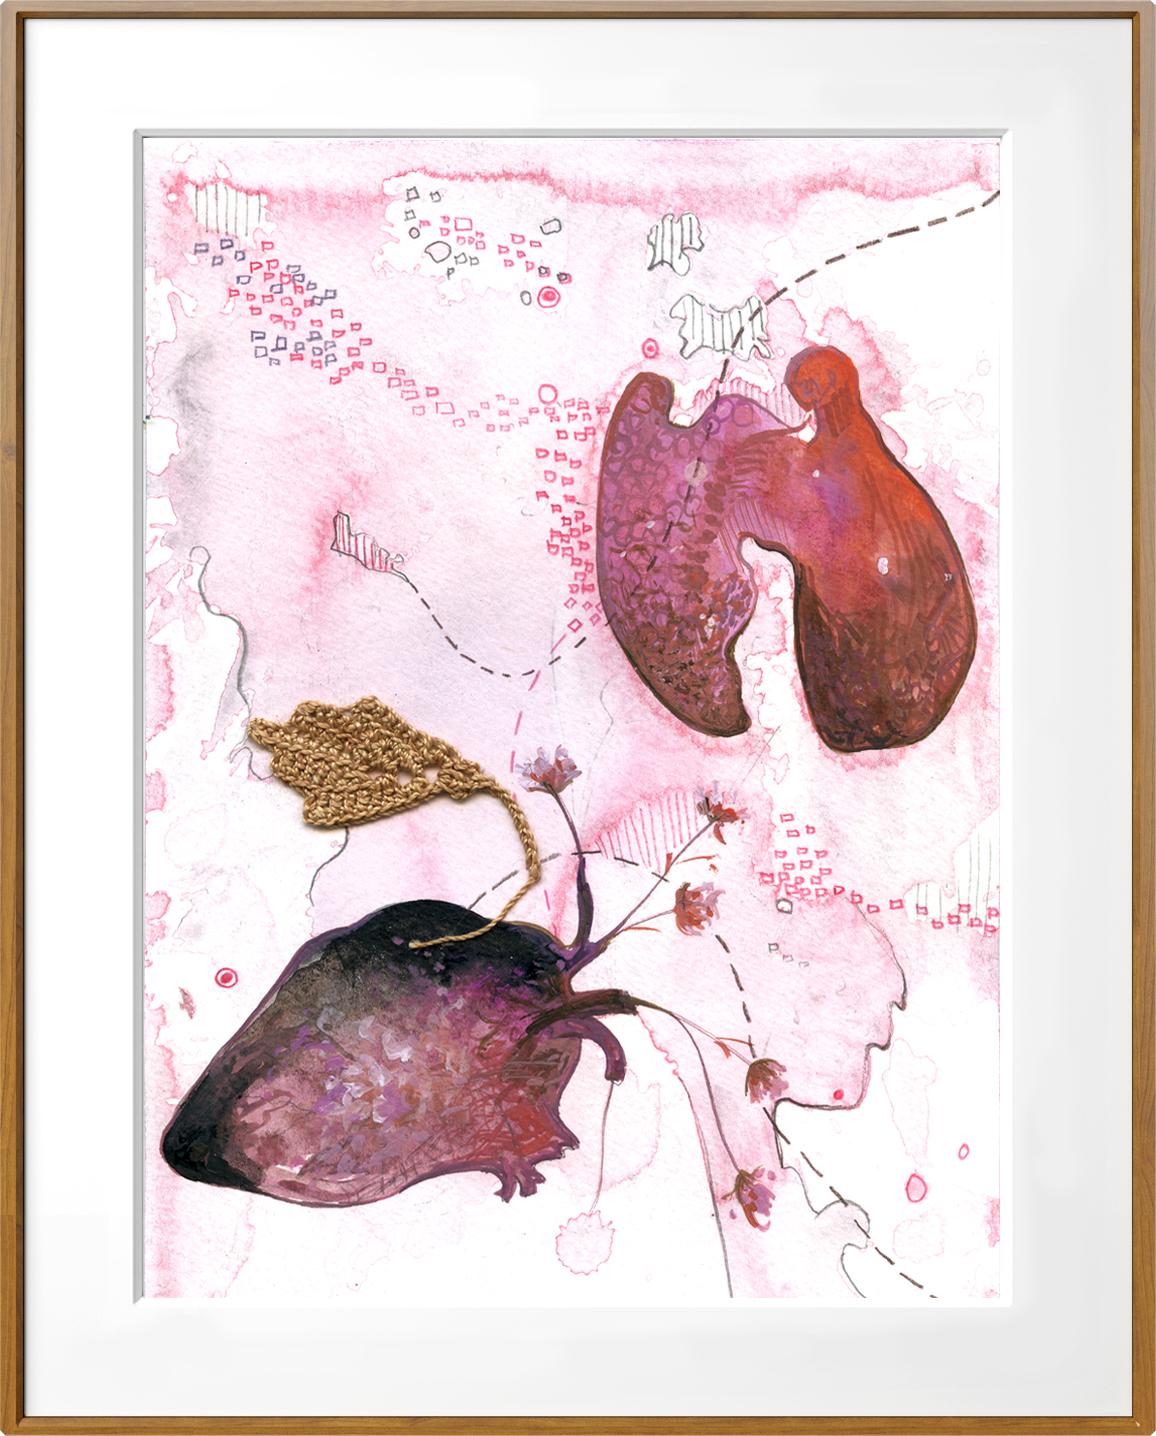 Birth Healing -  14 panel Pink, Red, and Grey Painting by Indian Artist  4